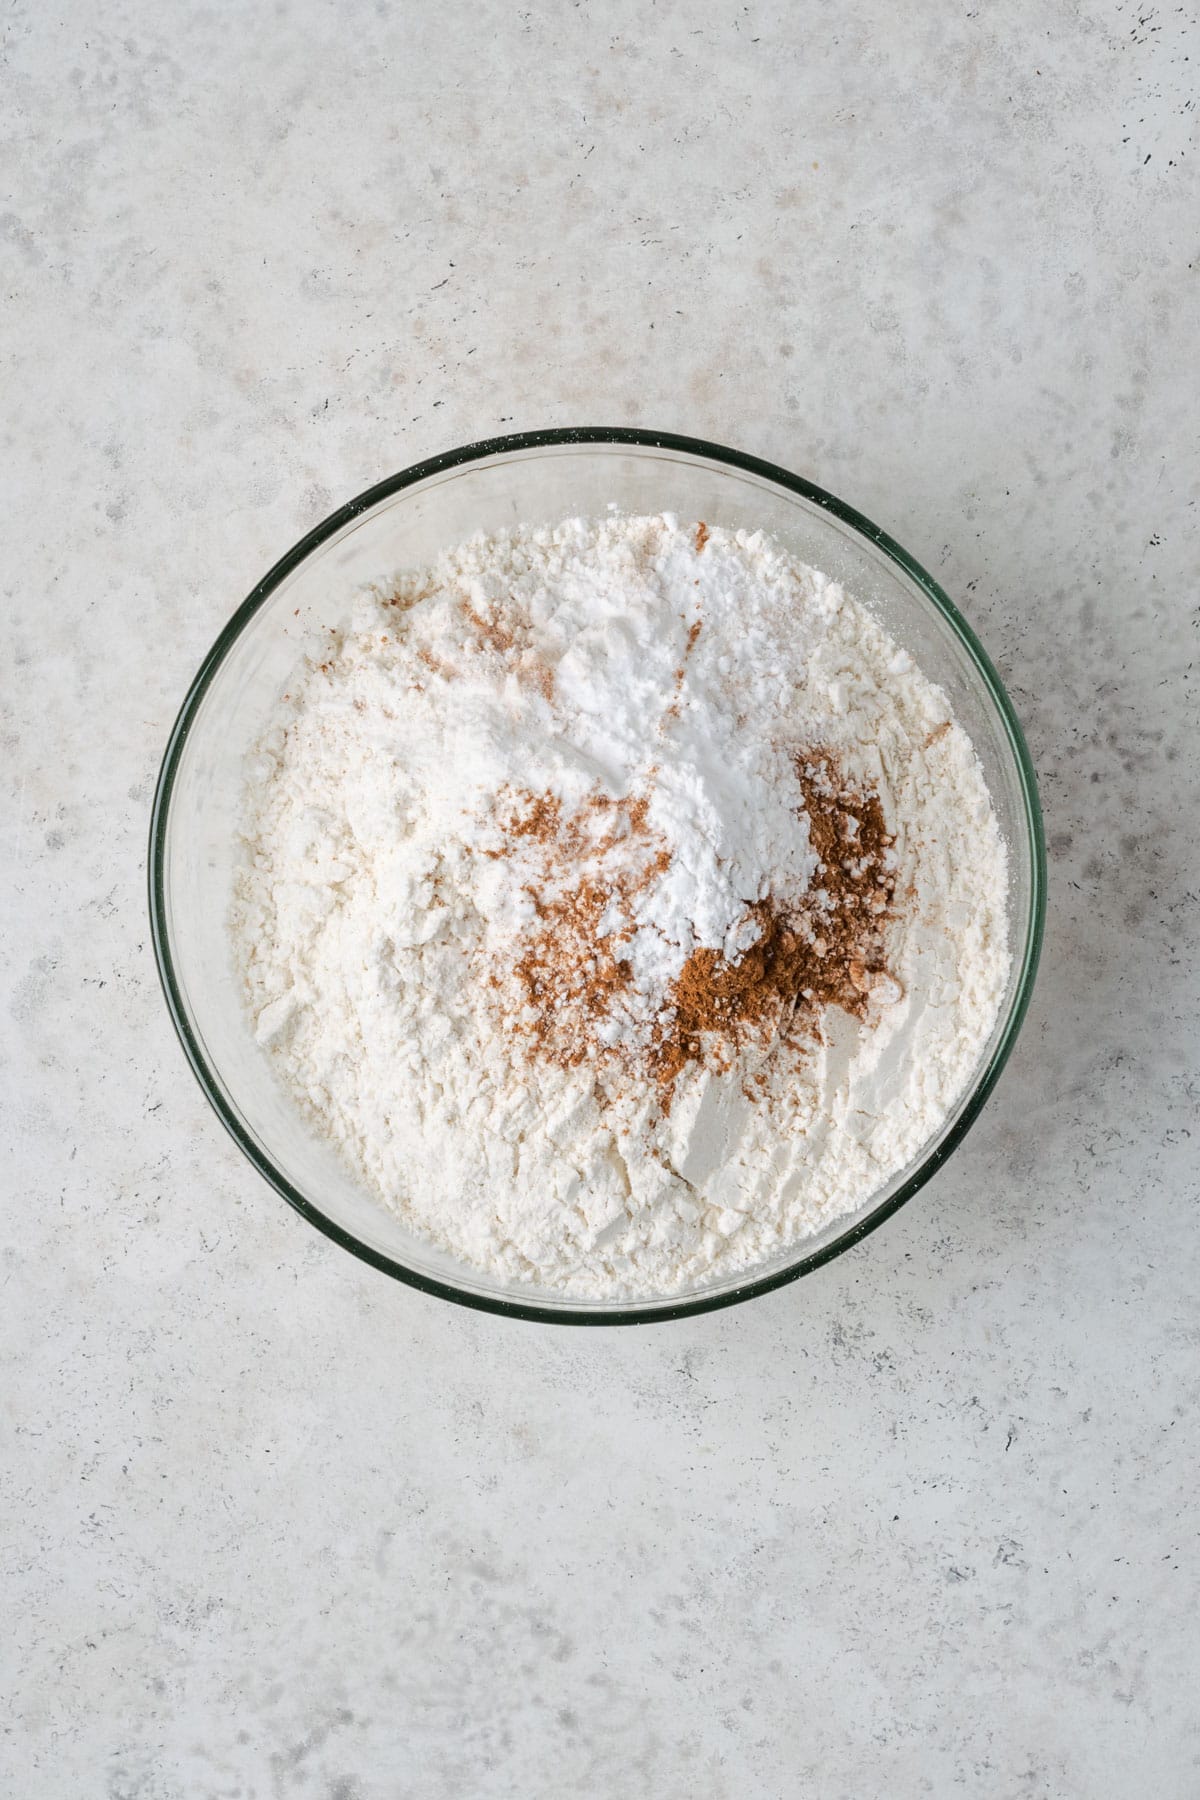 Gluten free flour, cream of tartar, baking soda, salt and cinnamon combined in a small mixing bowl. 